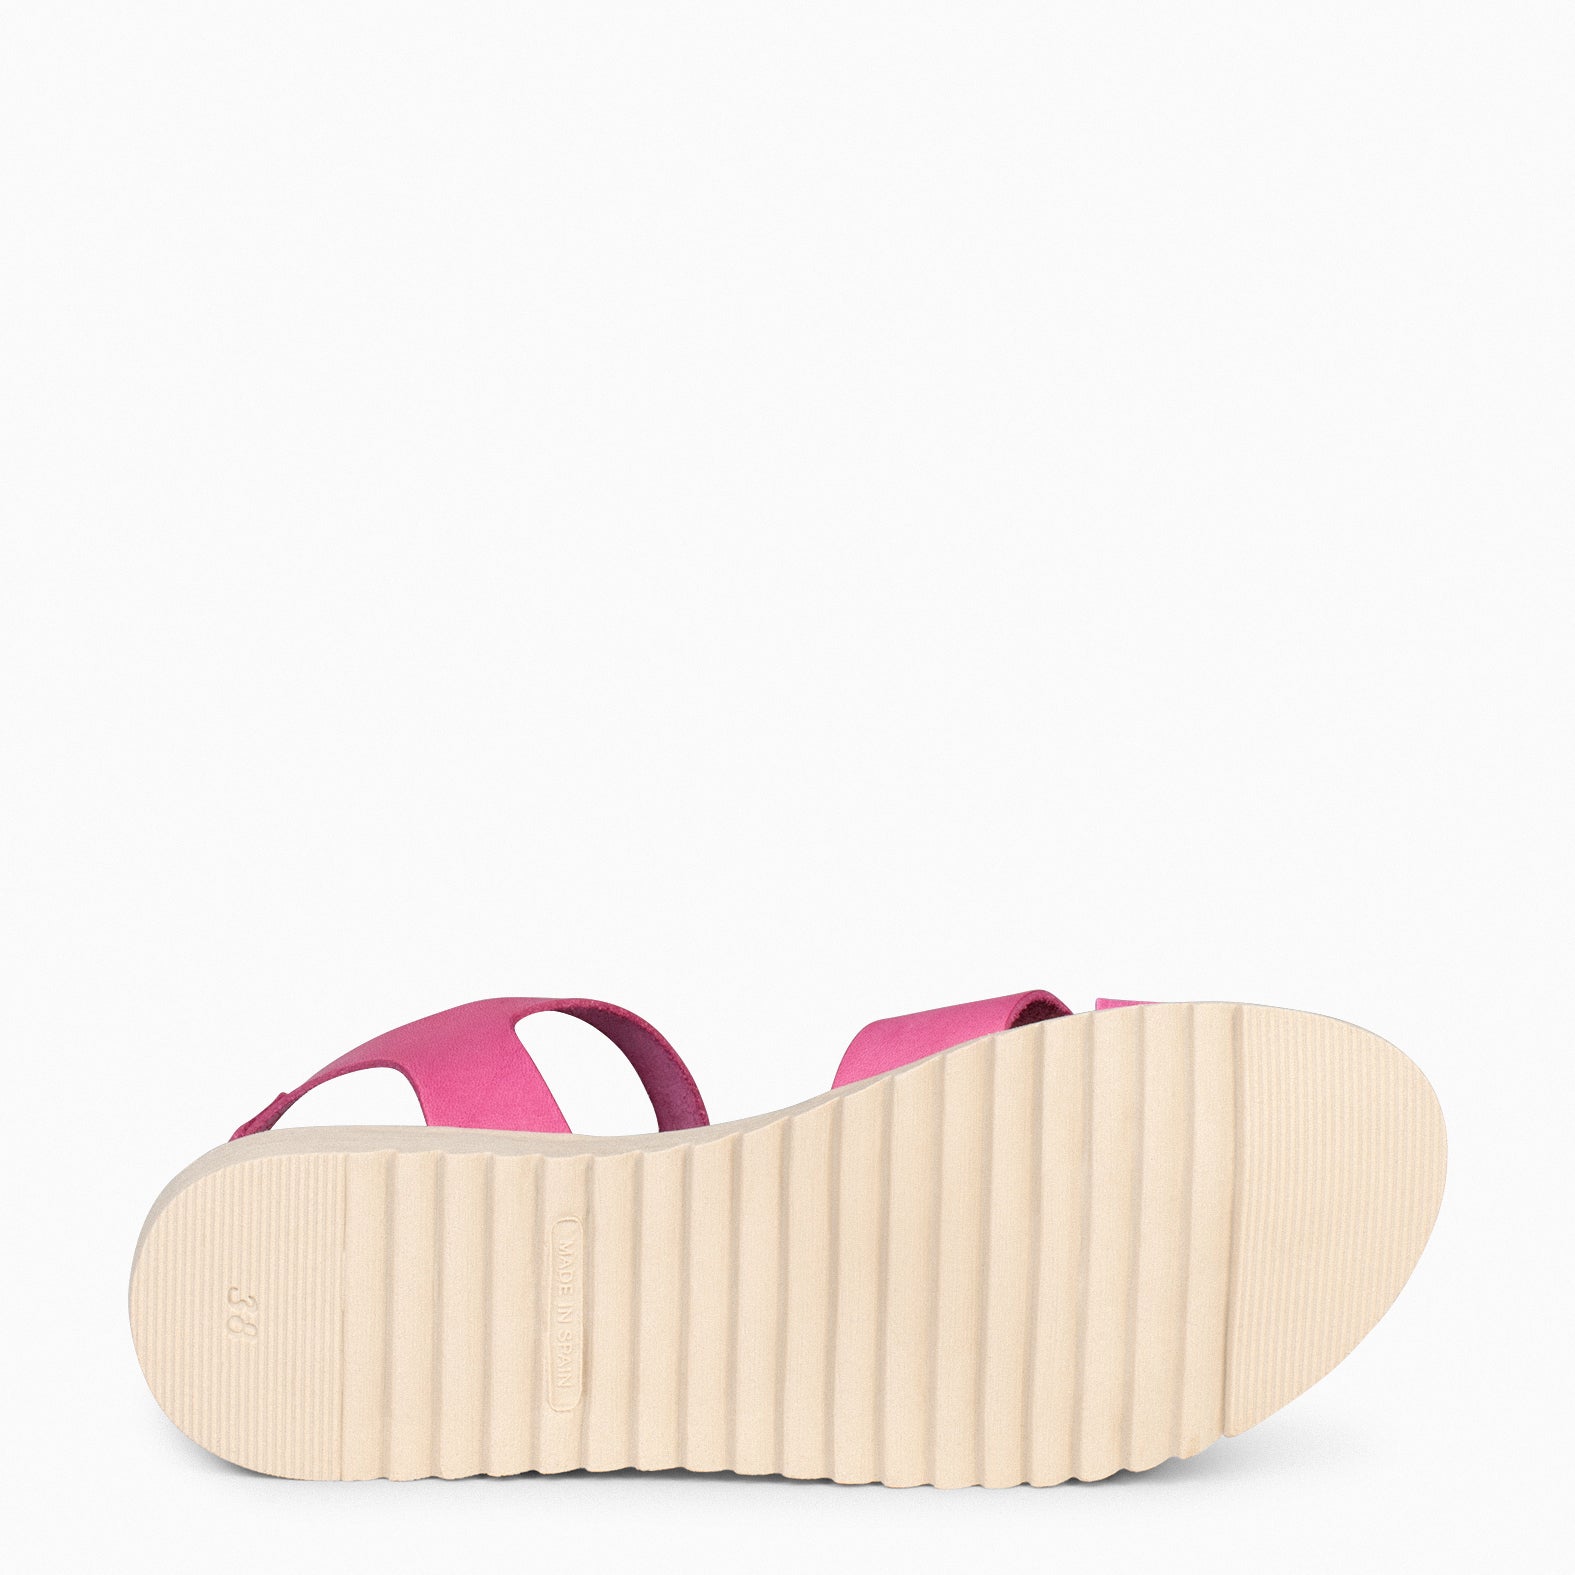 FRESH – PINK low wedge leather sandals